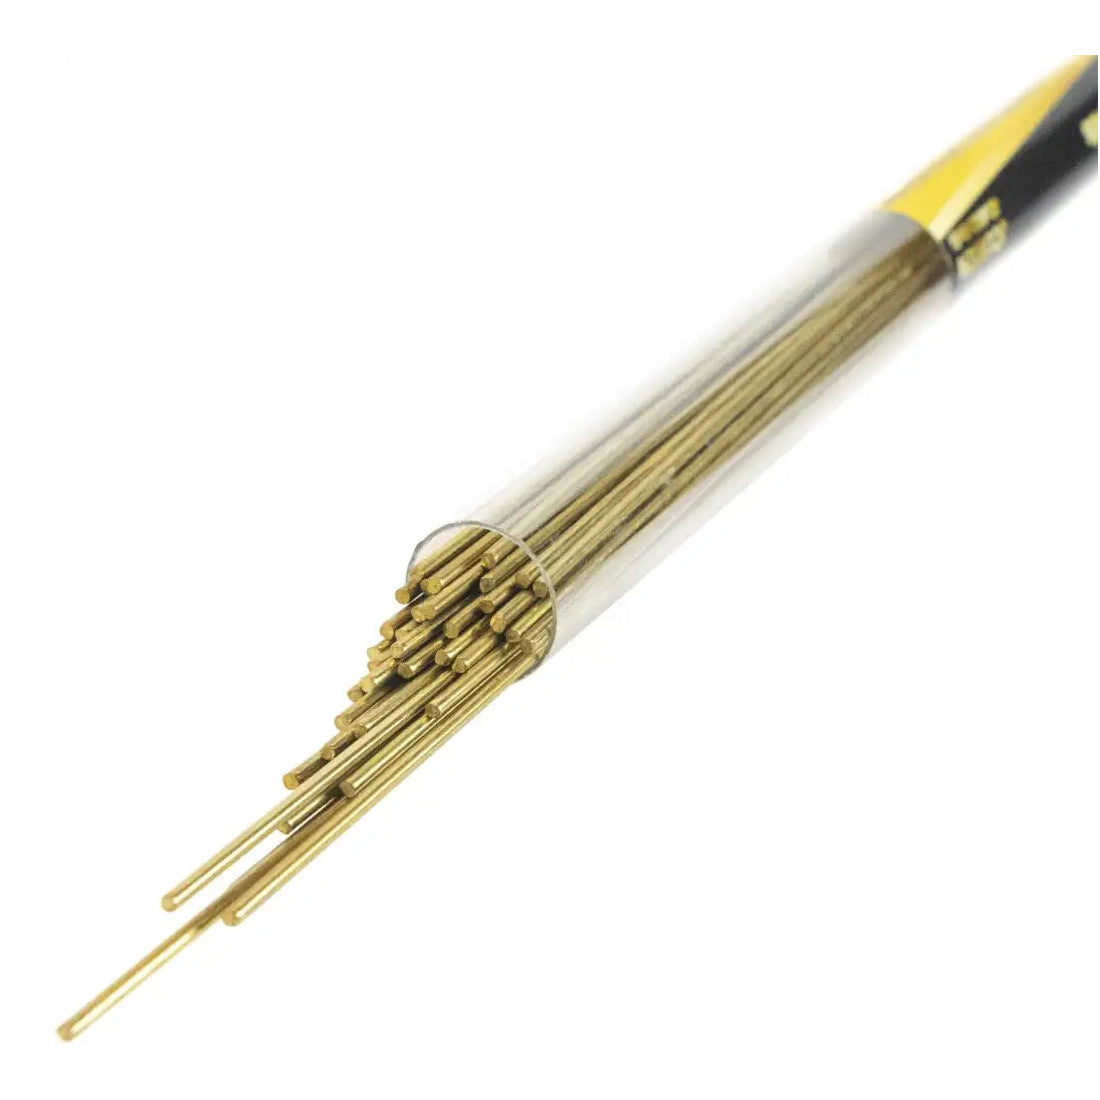 JCU60ZN 1/2 lb 40 sticks Brass Brazing Rods containing small amounts of tin and silicon